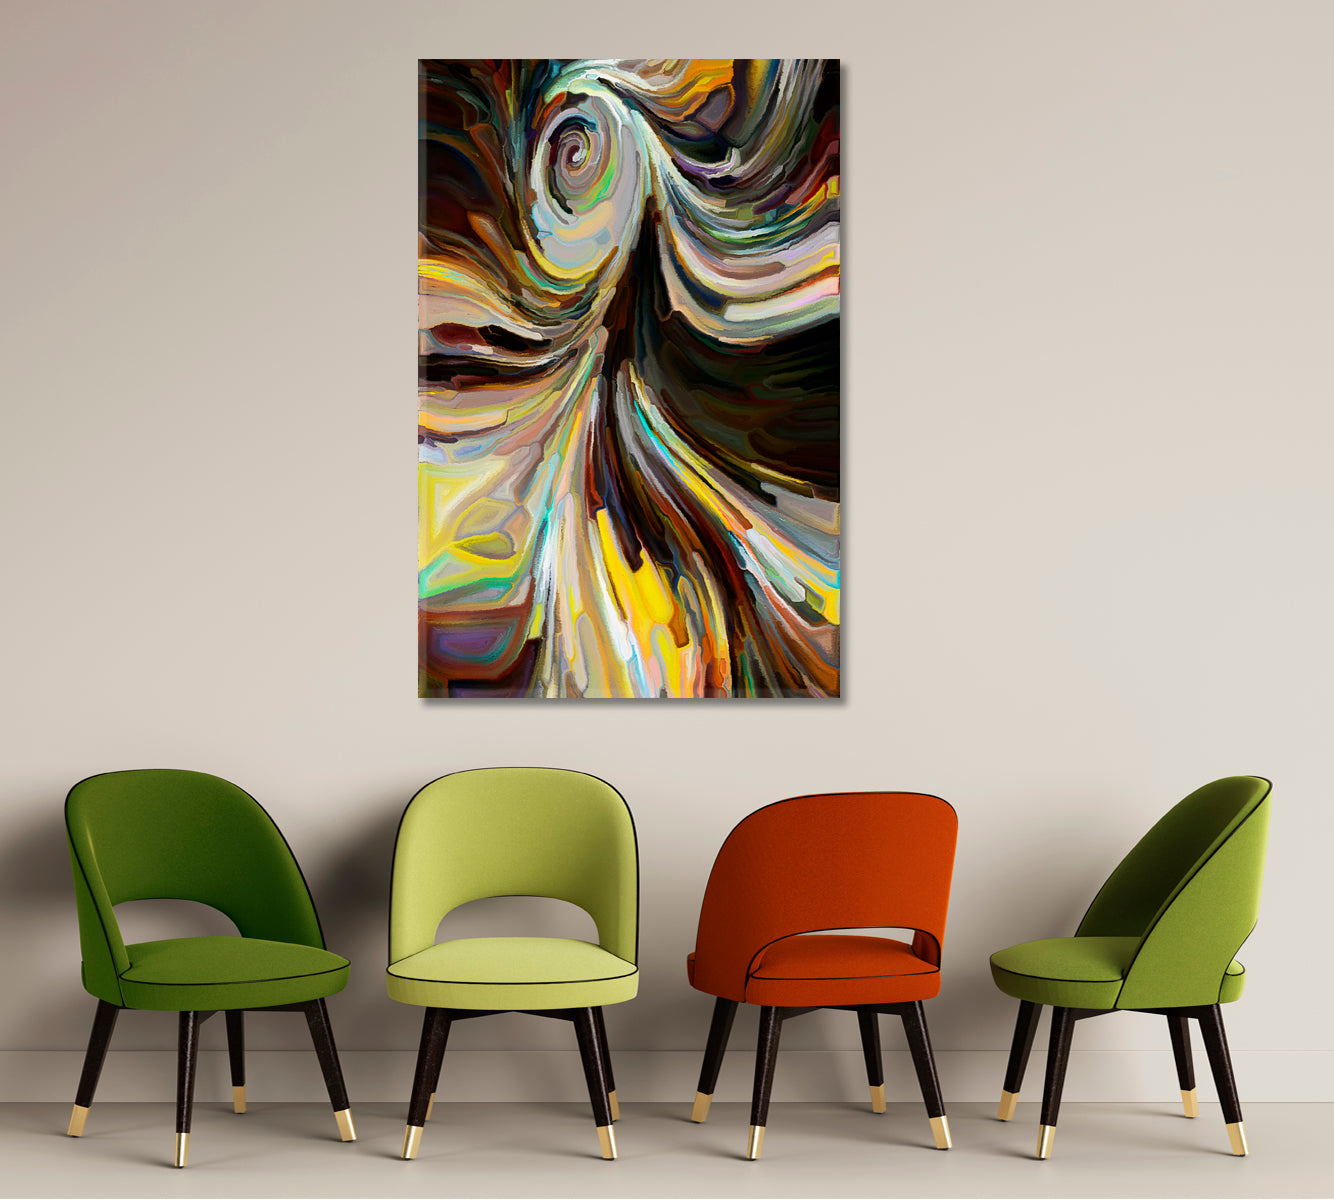 Abstract Swirling Colorful Modern Art Abstract Art Print Artesty 1 Panel 16"x24" 